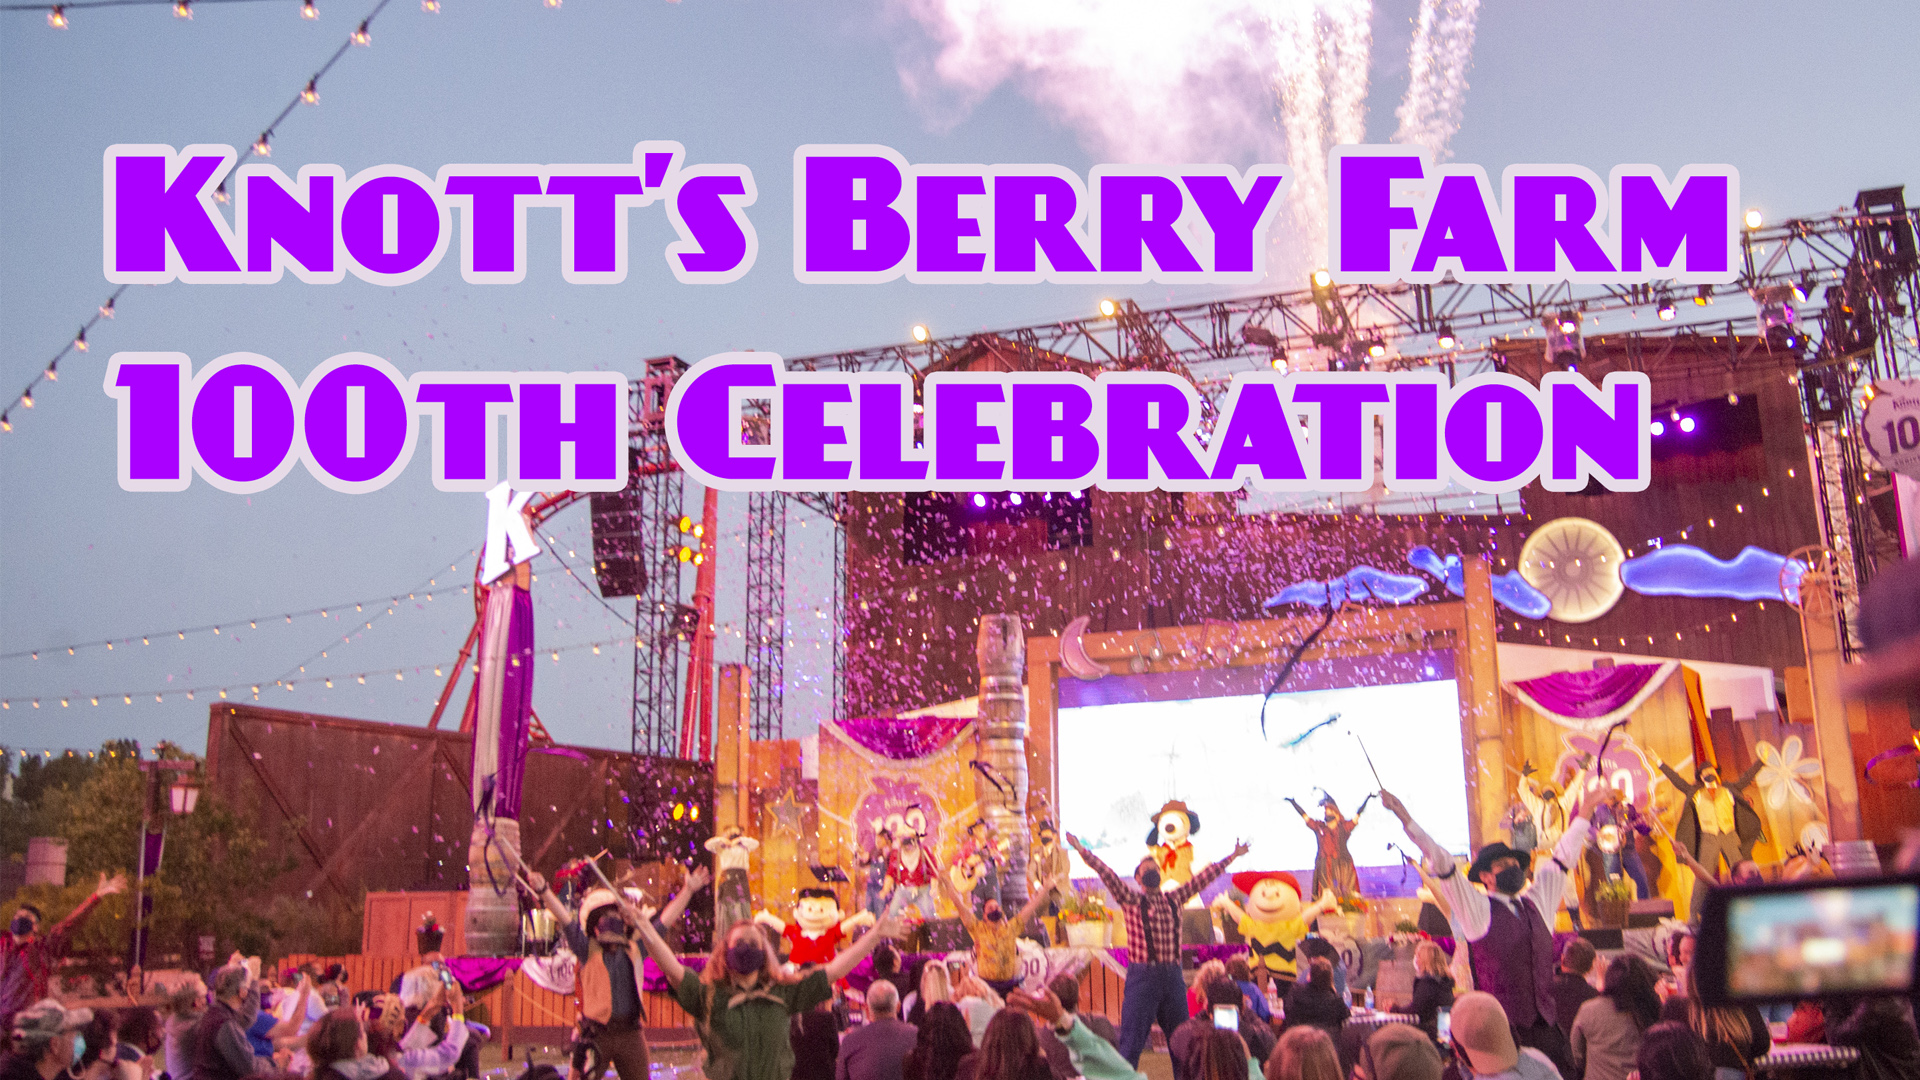 Knott’s Berry Farm Celebrates 100 Years With An Exciting and Festive Party